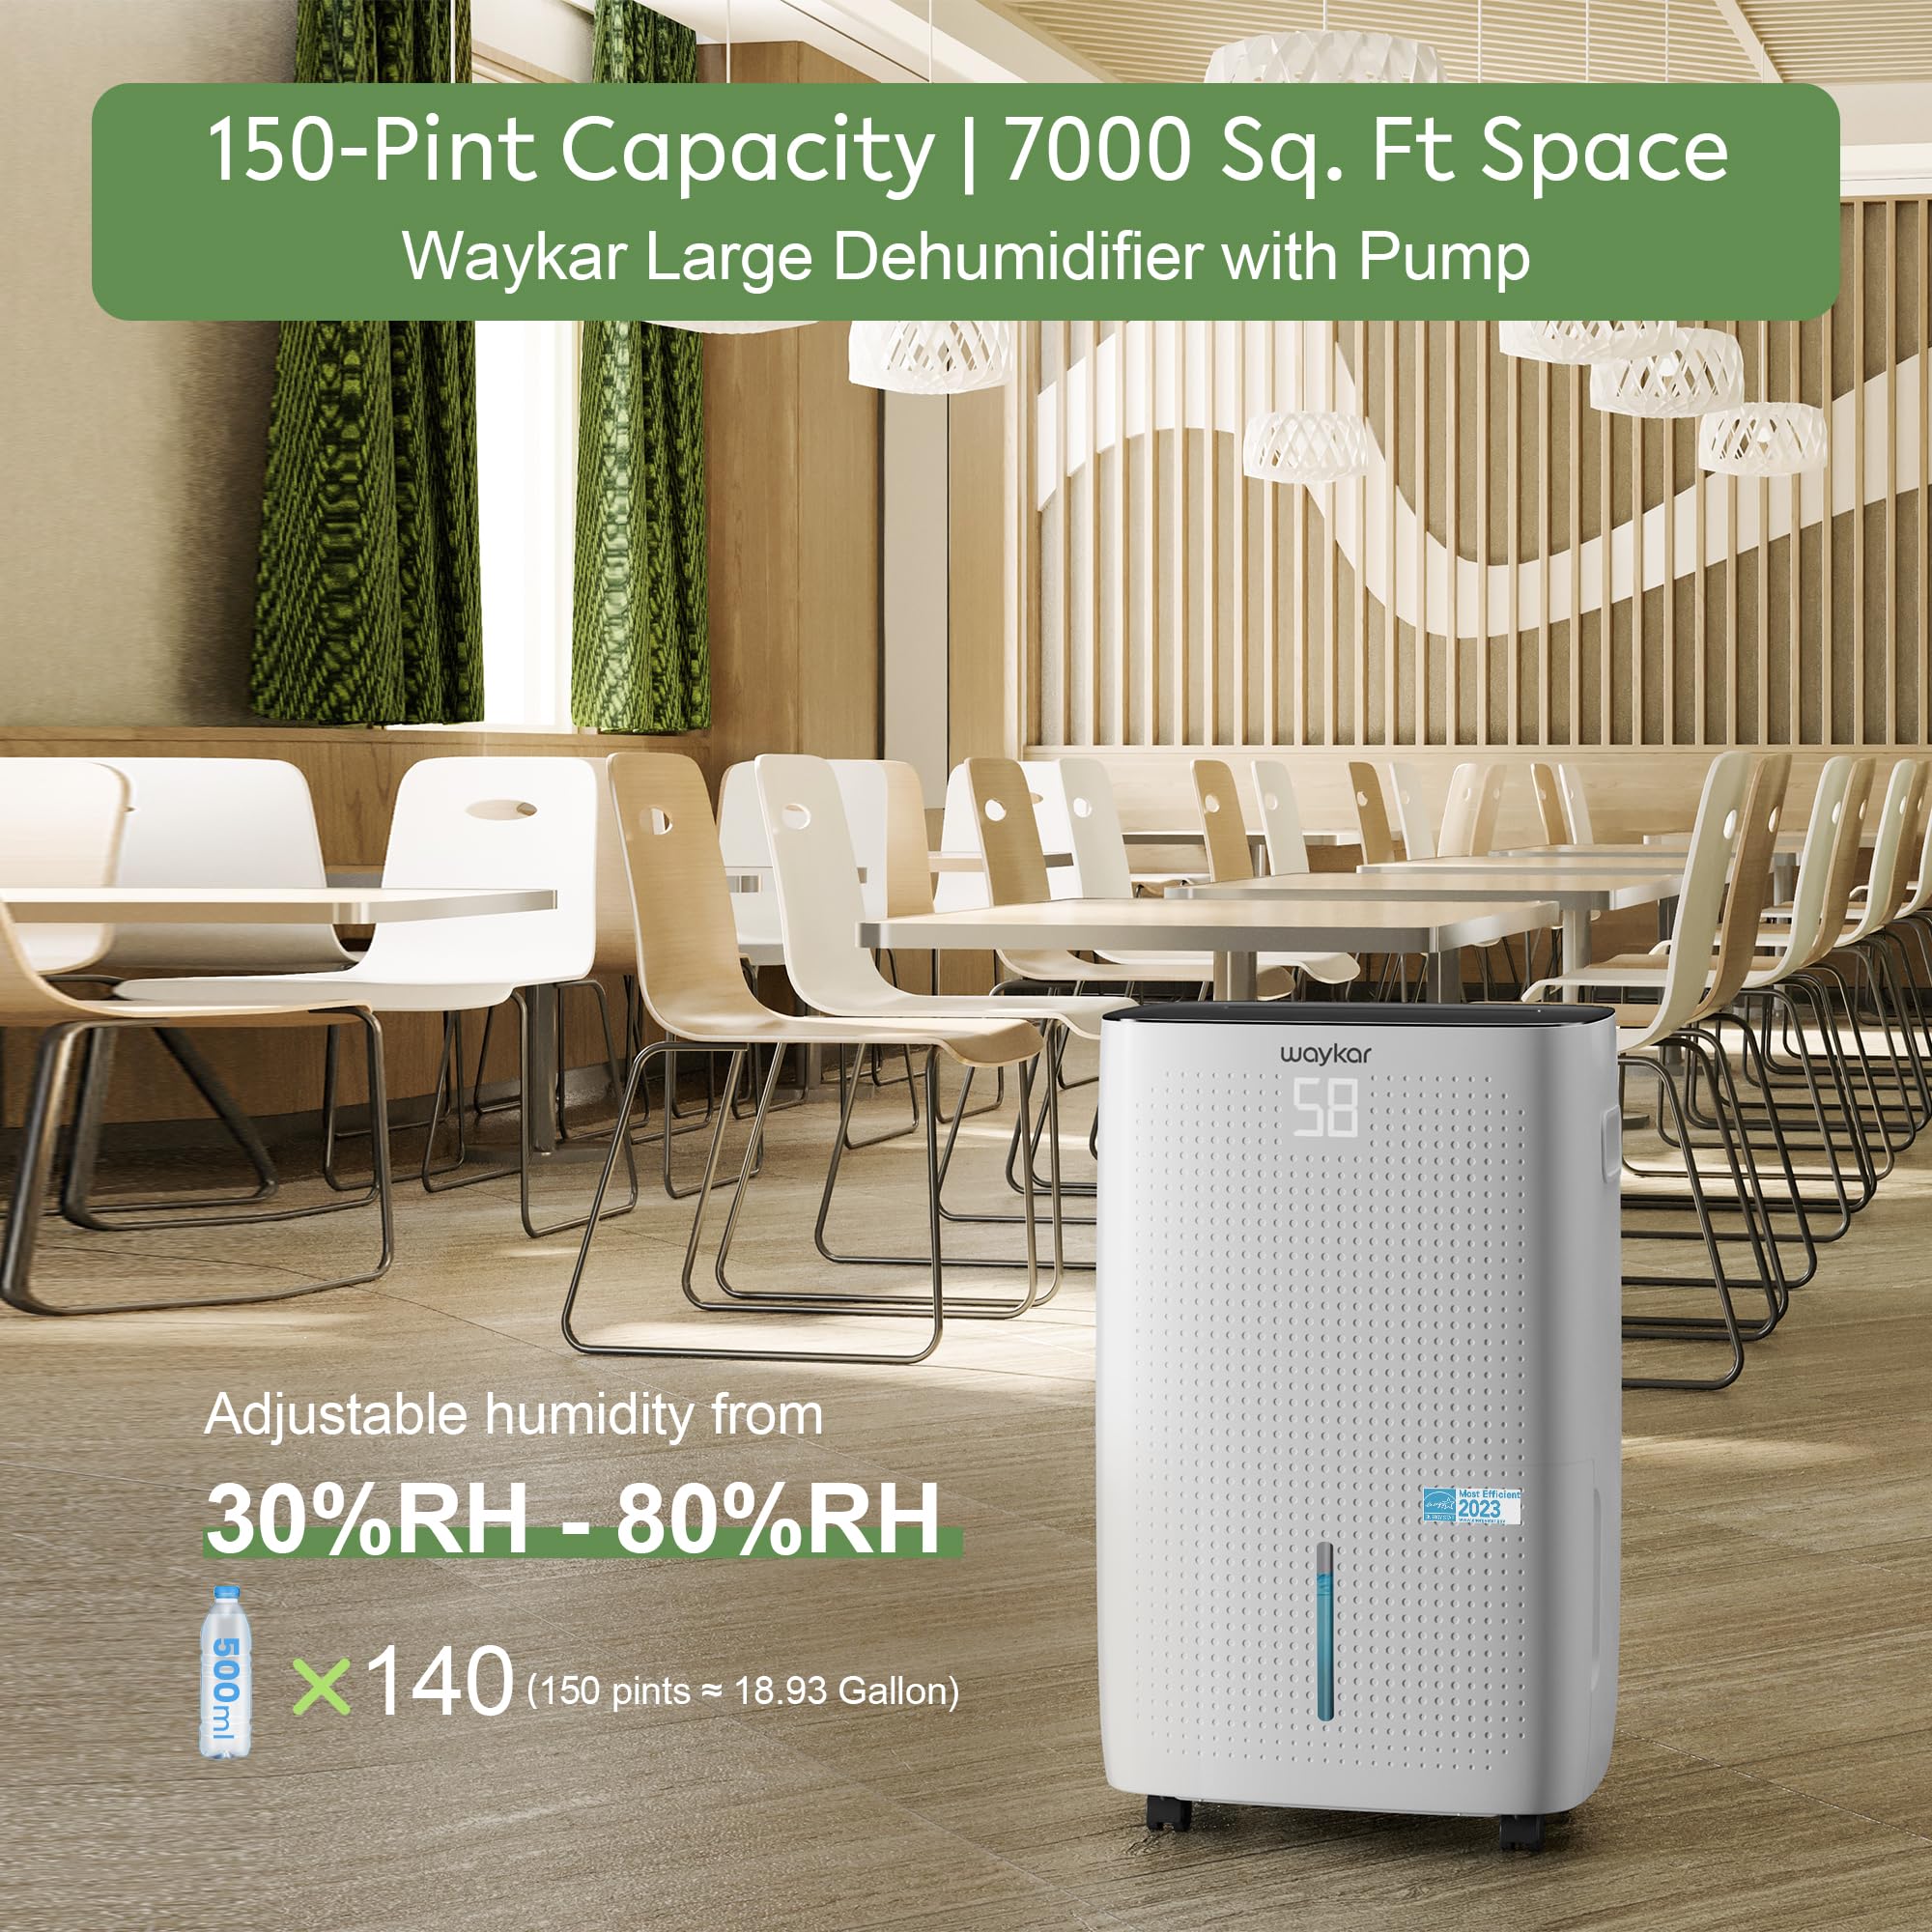 Waykar 150 Pints 7,000 Sq. Ft Energy Star Dehumidifier with Pump for Commercial and Industrial Large Room, Warehouse, Storage, Home, Basement with 1.85 Gal Water Tank and Drain Hose